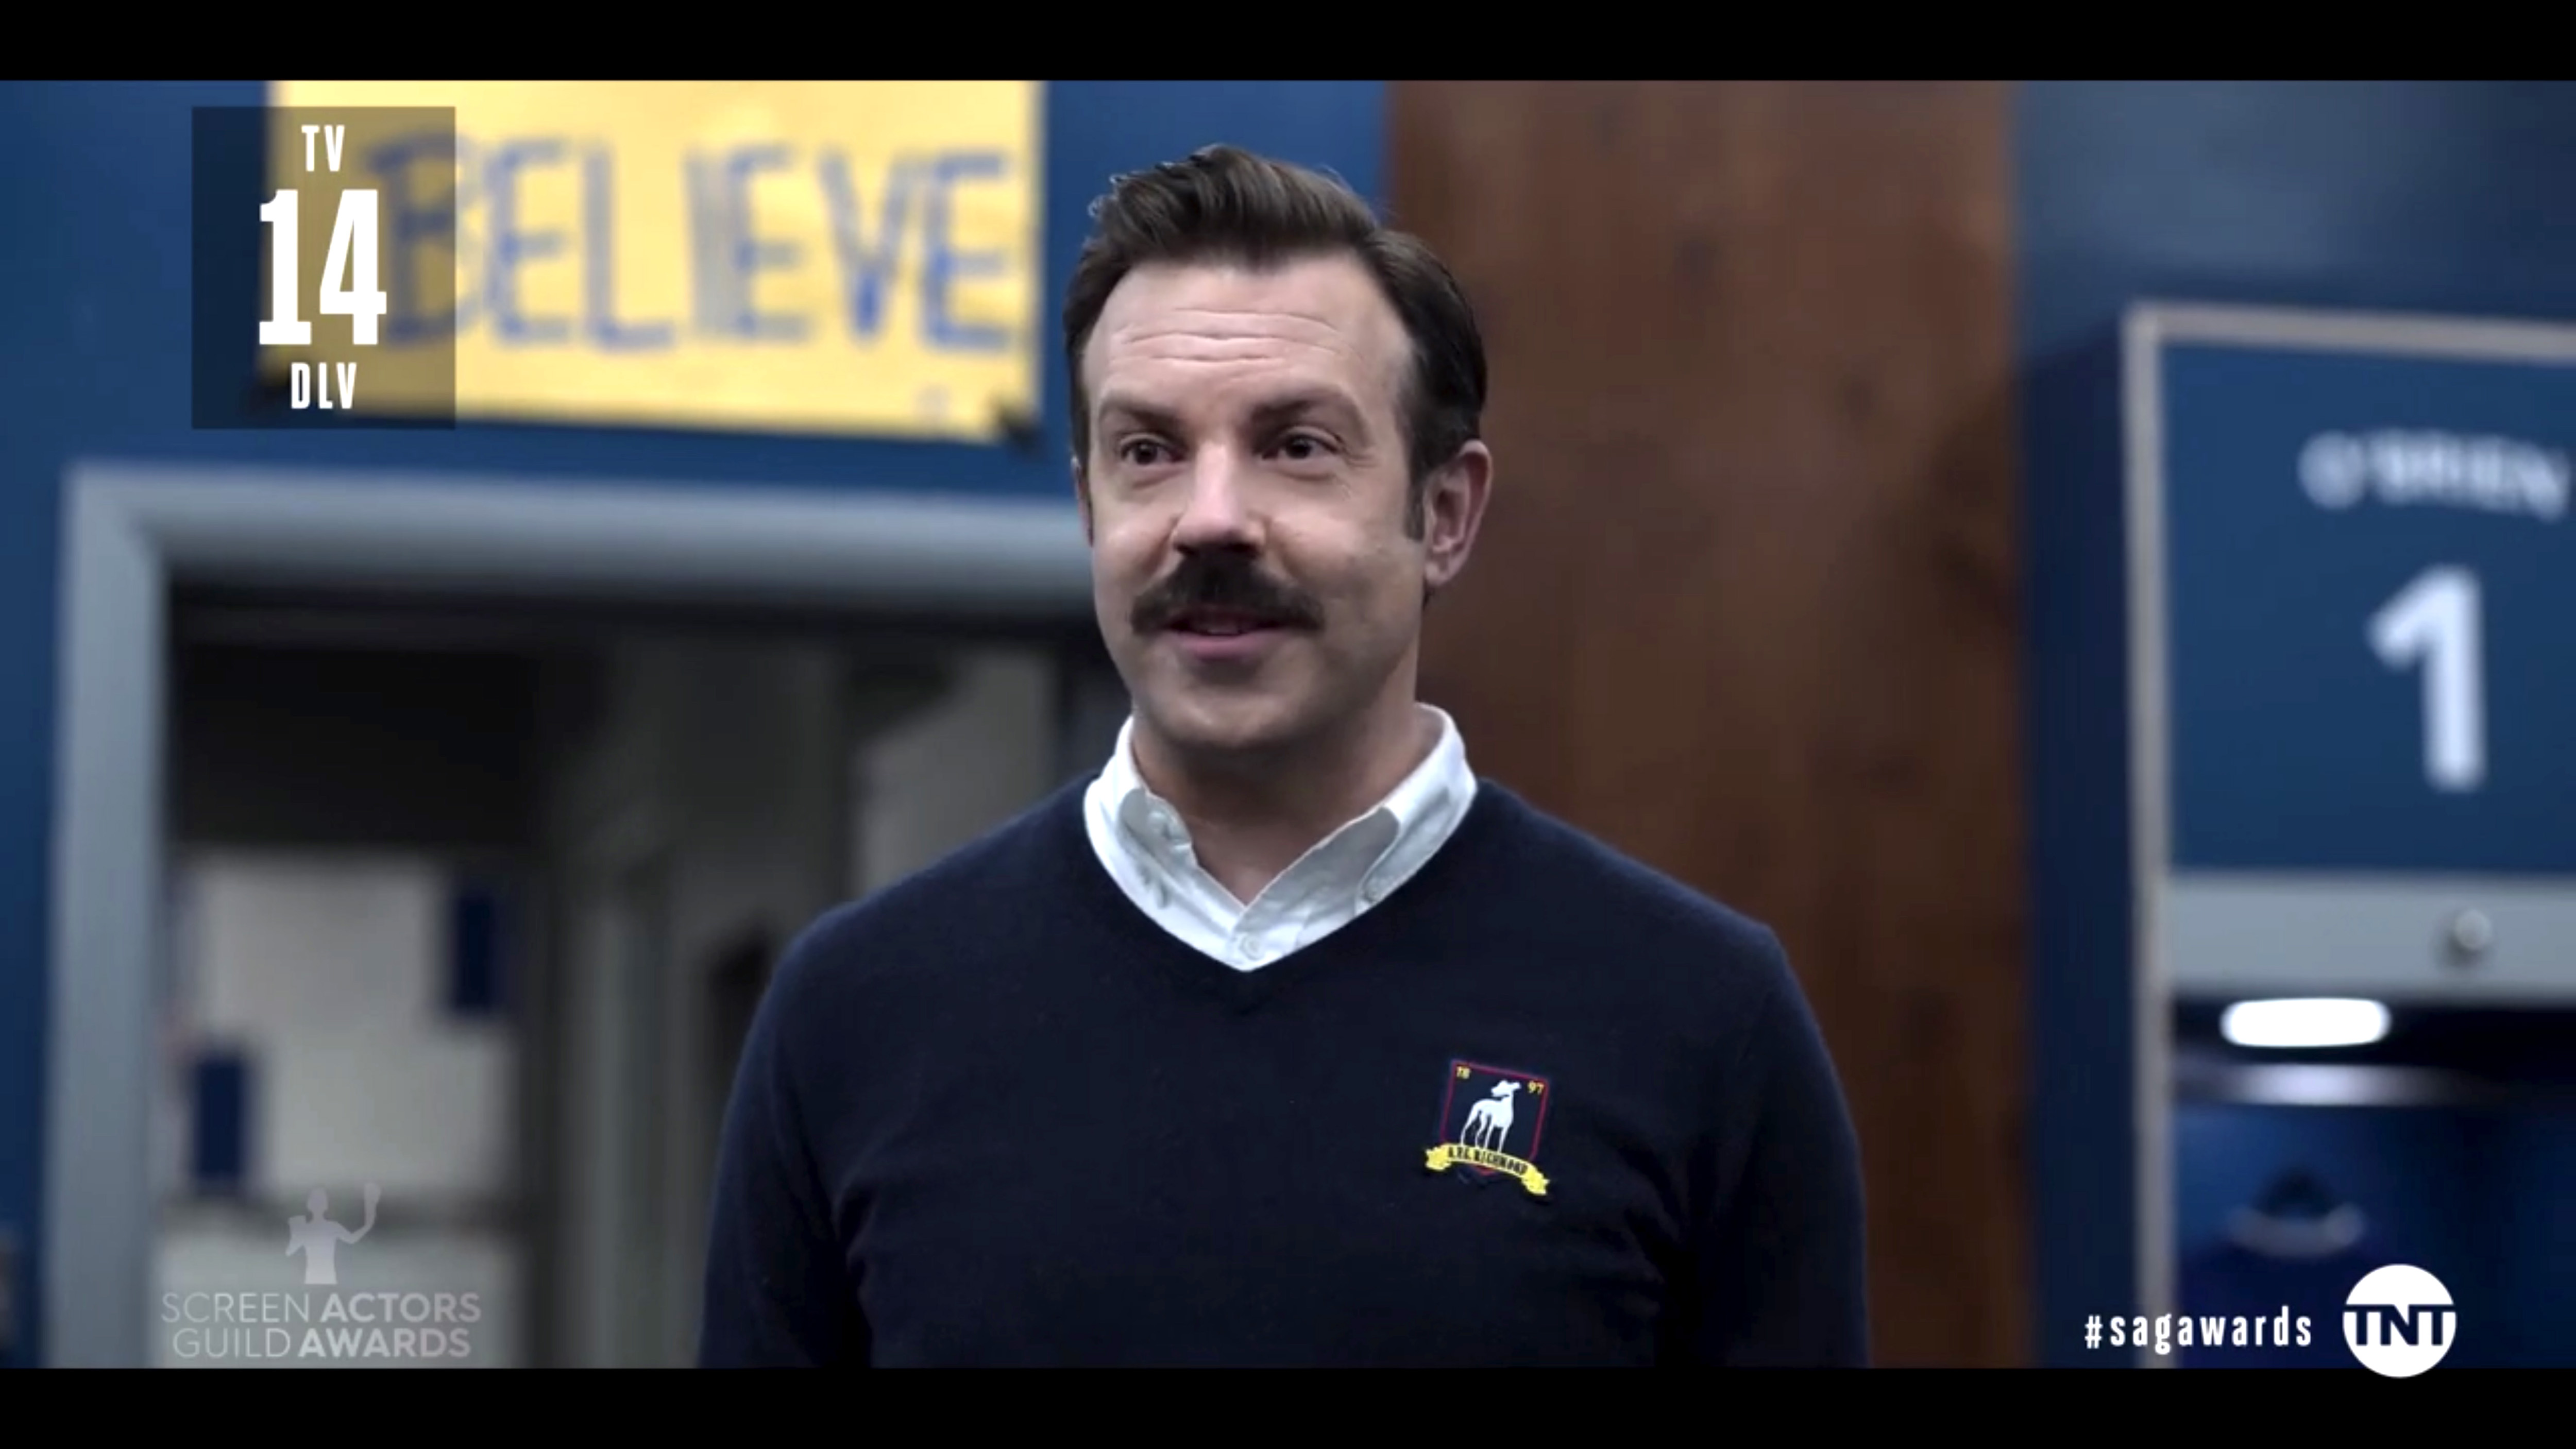 Jason Sudeikis as Ted Lasso in a screengrab from the 2021 SAG Awards